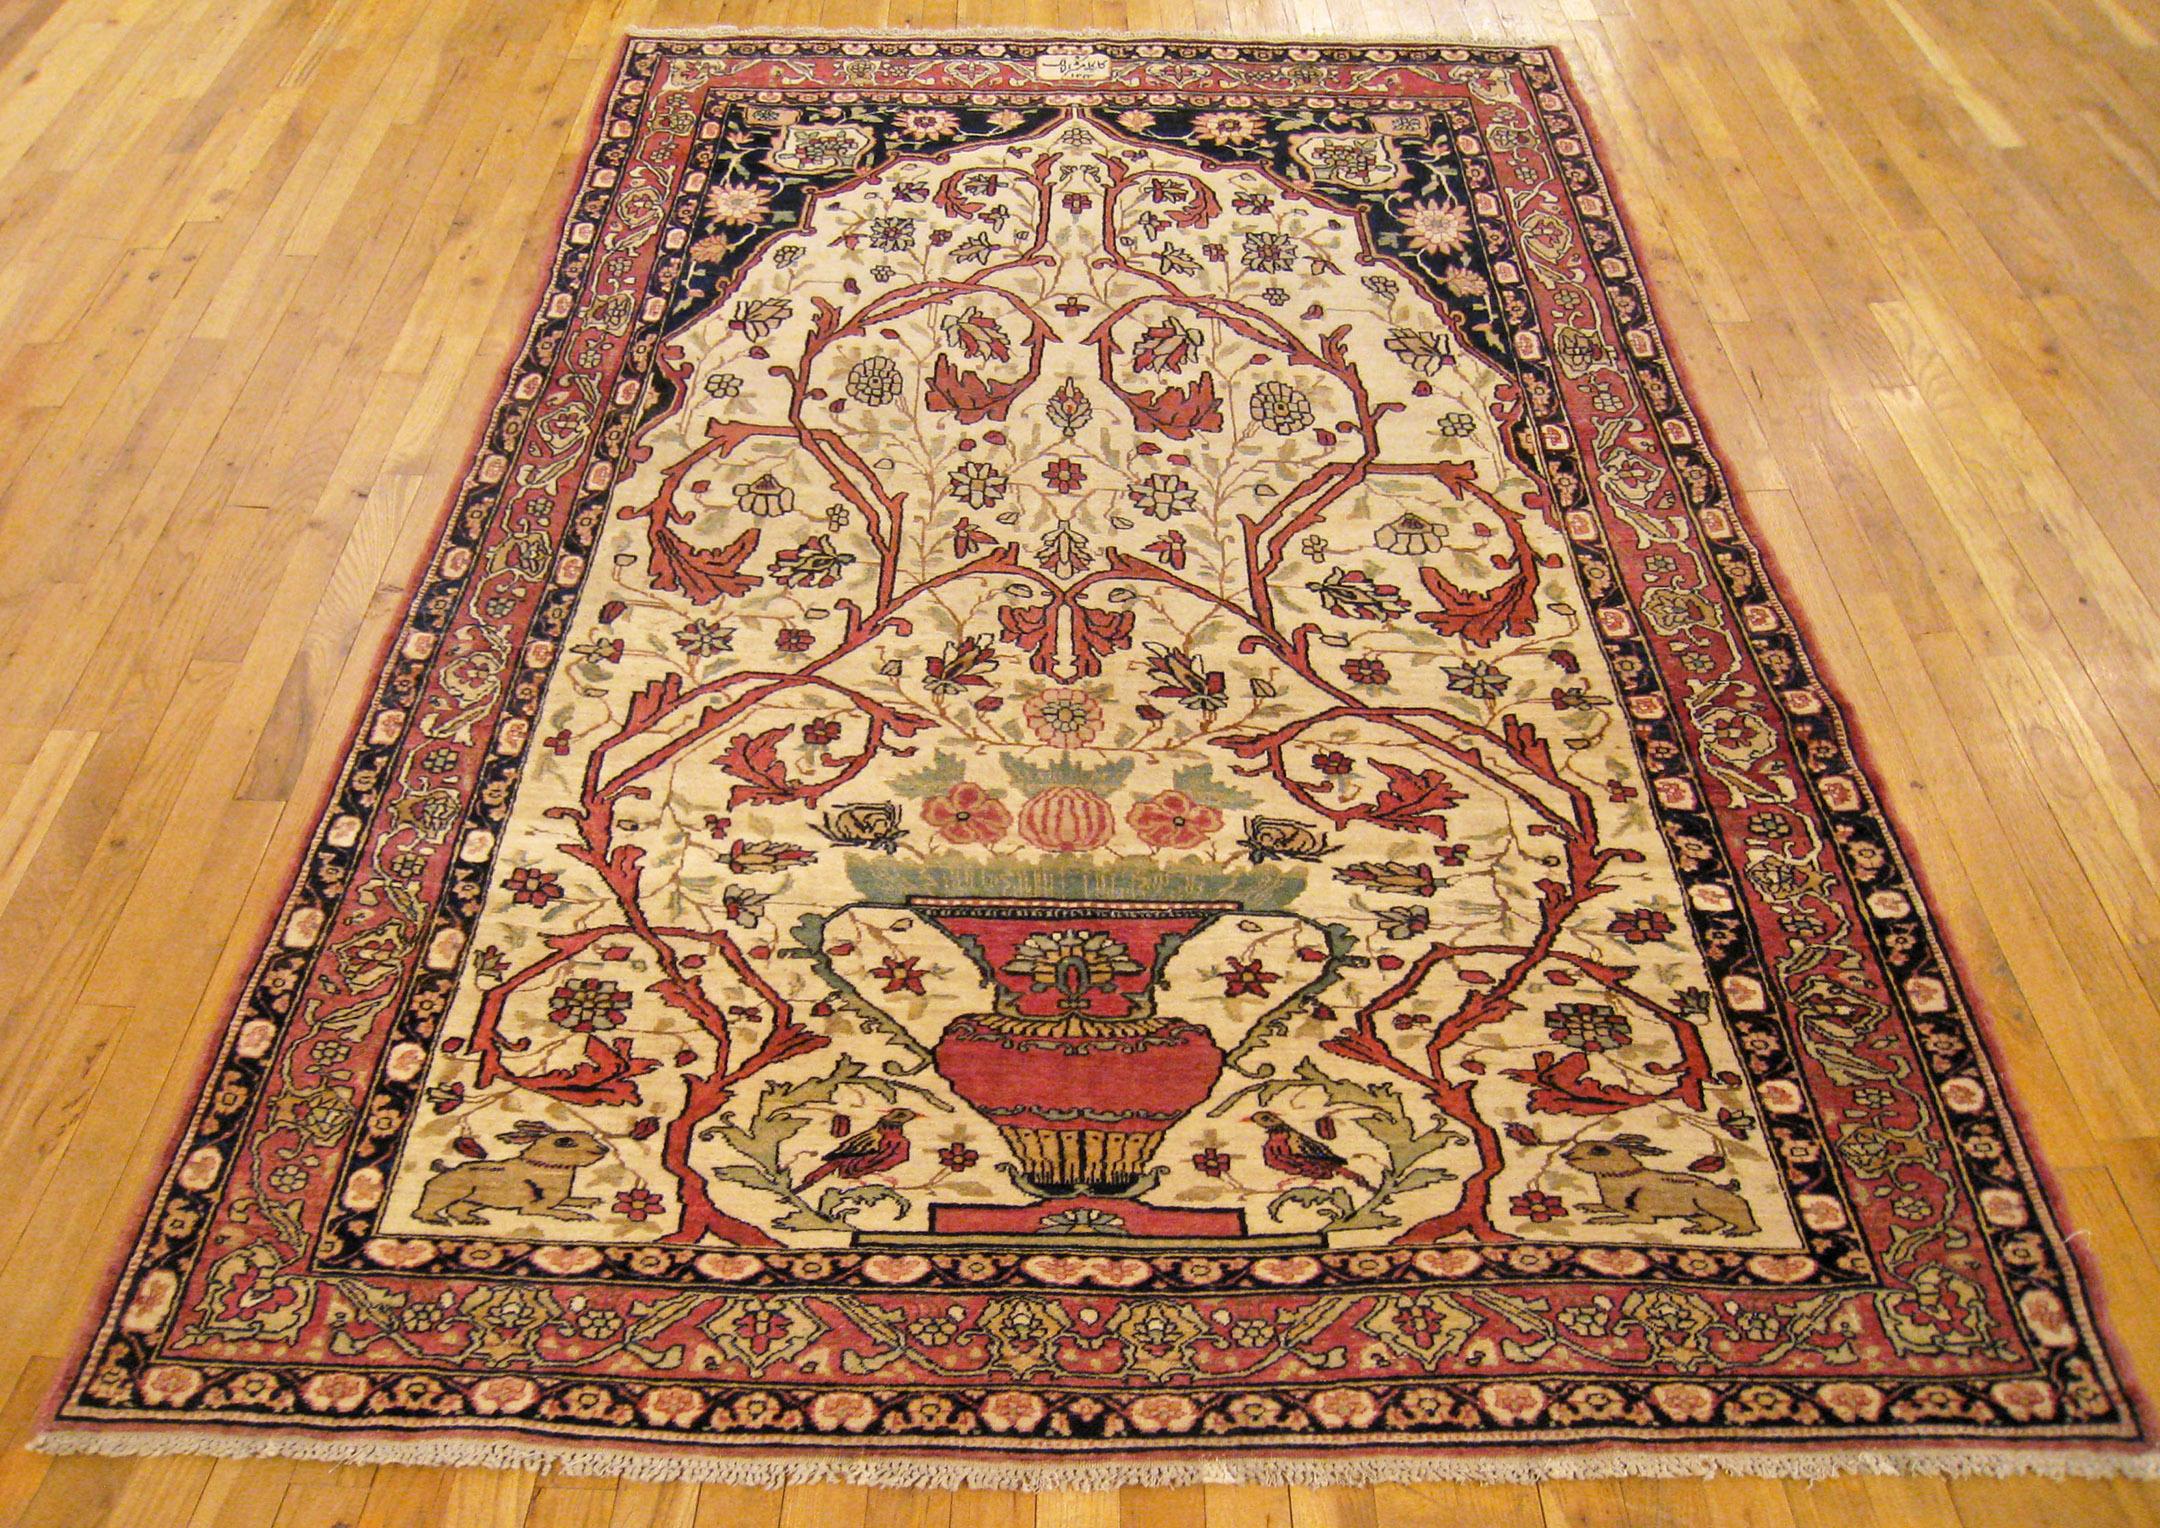 An antique Persian Lavar Kerman oriental rug, size 8'4 x 5'0, circa 1906. This antique hand-knotted wool rug features a vase design in the finely detailed ivory central field, with a prayer arch at one end, and a weaver's mark in the upper border.